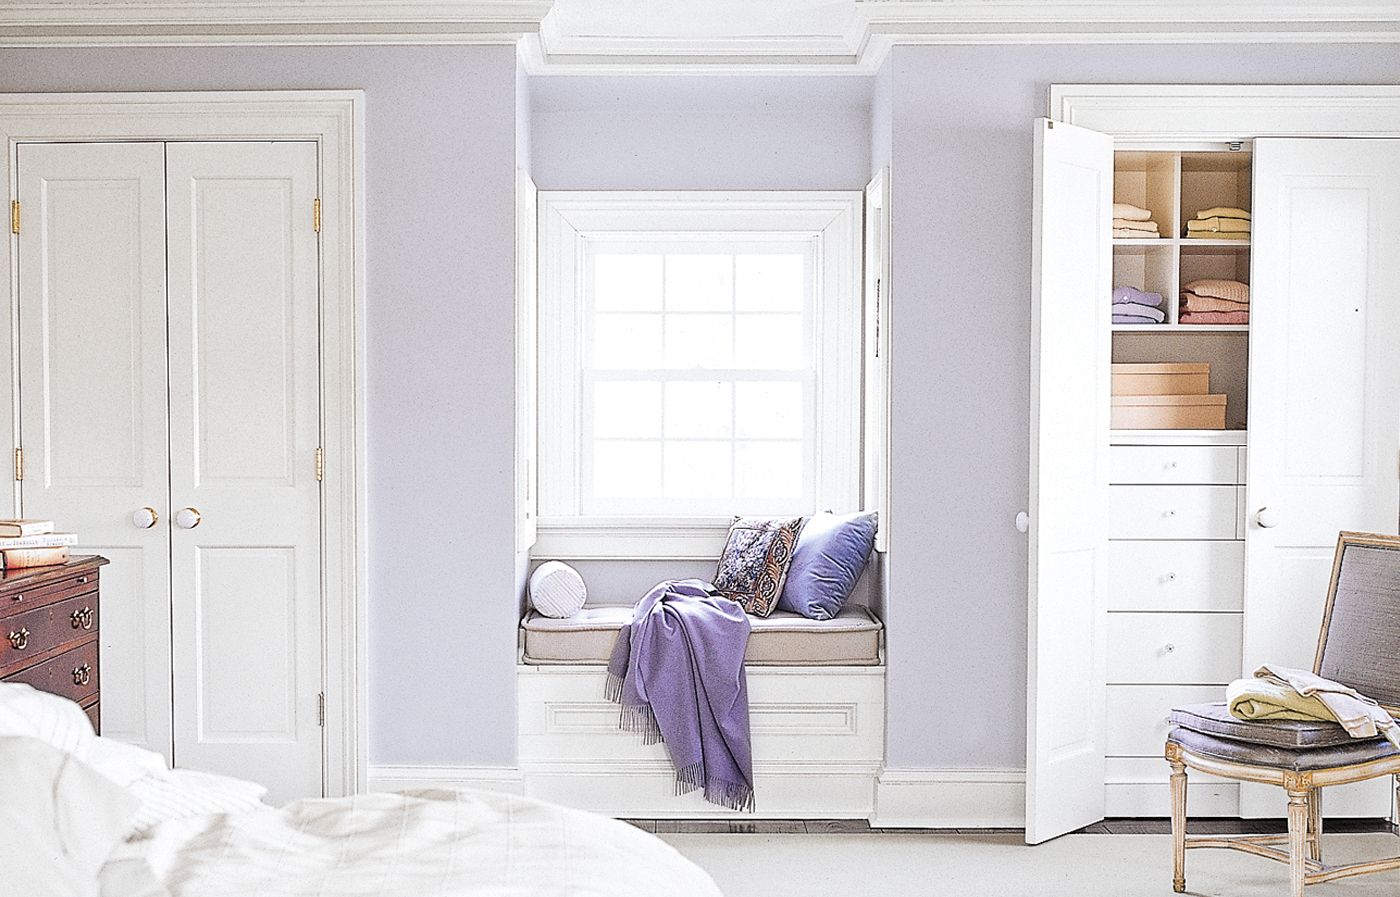 Window seat ideas - 15 clever ways to carve out extra seating and storage